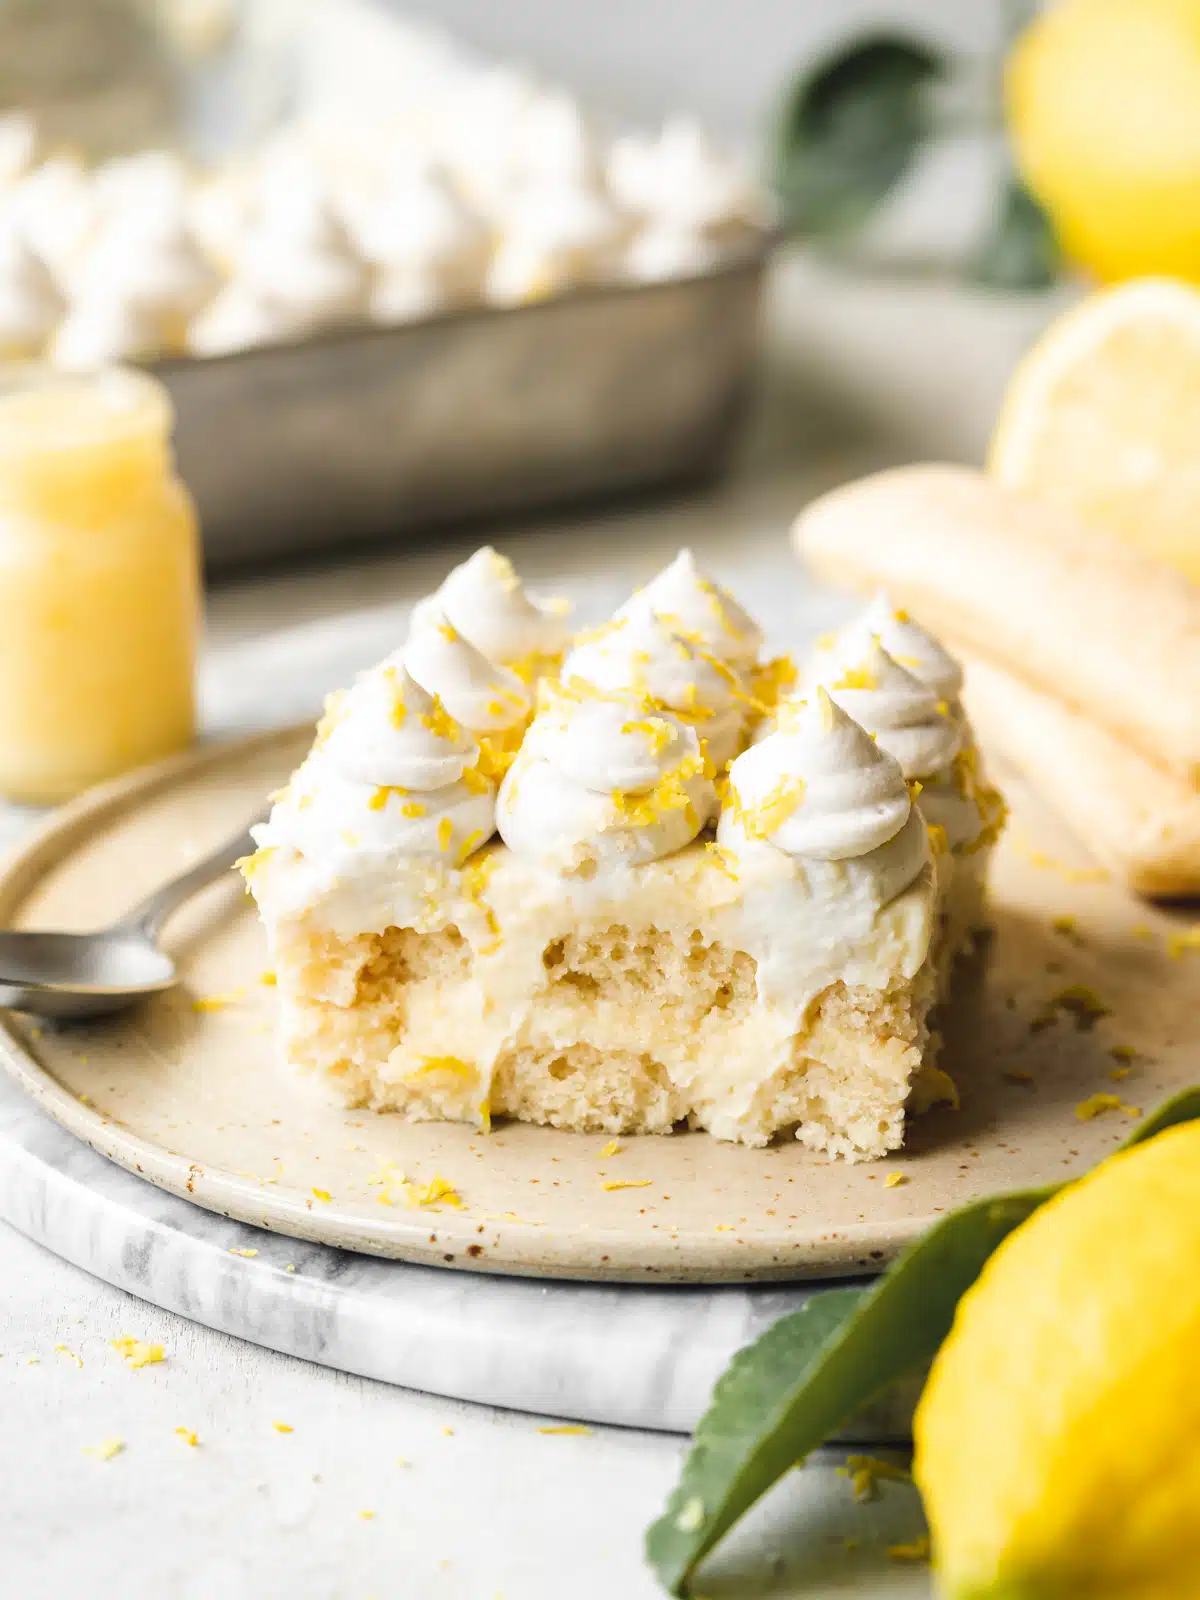 a slice of vegan lemon tiramisu with whipped cream topping on a ceramic plate with lemon curd and lemons in the background.